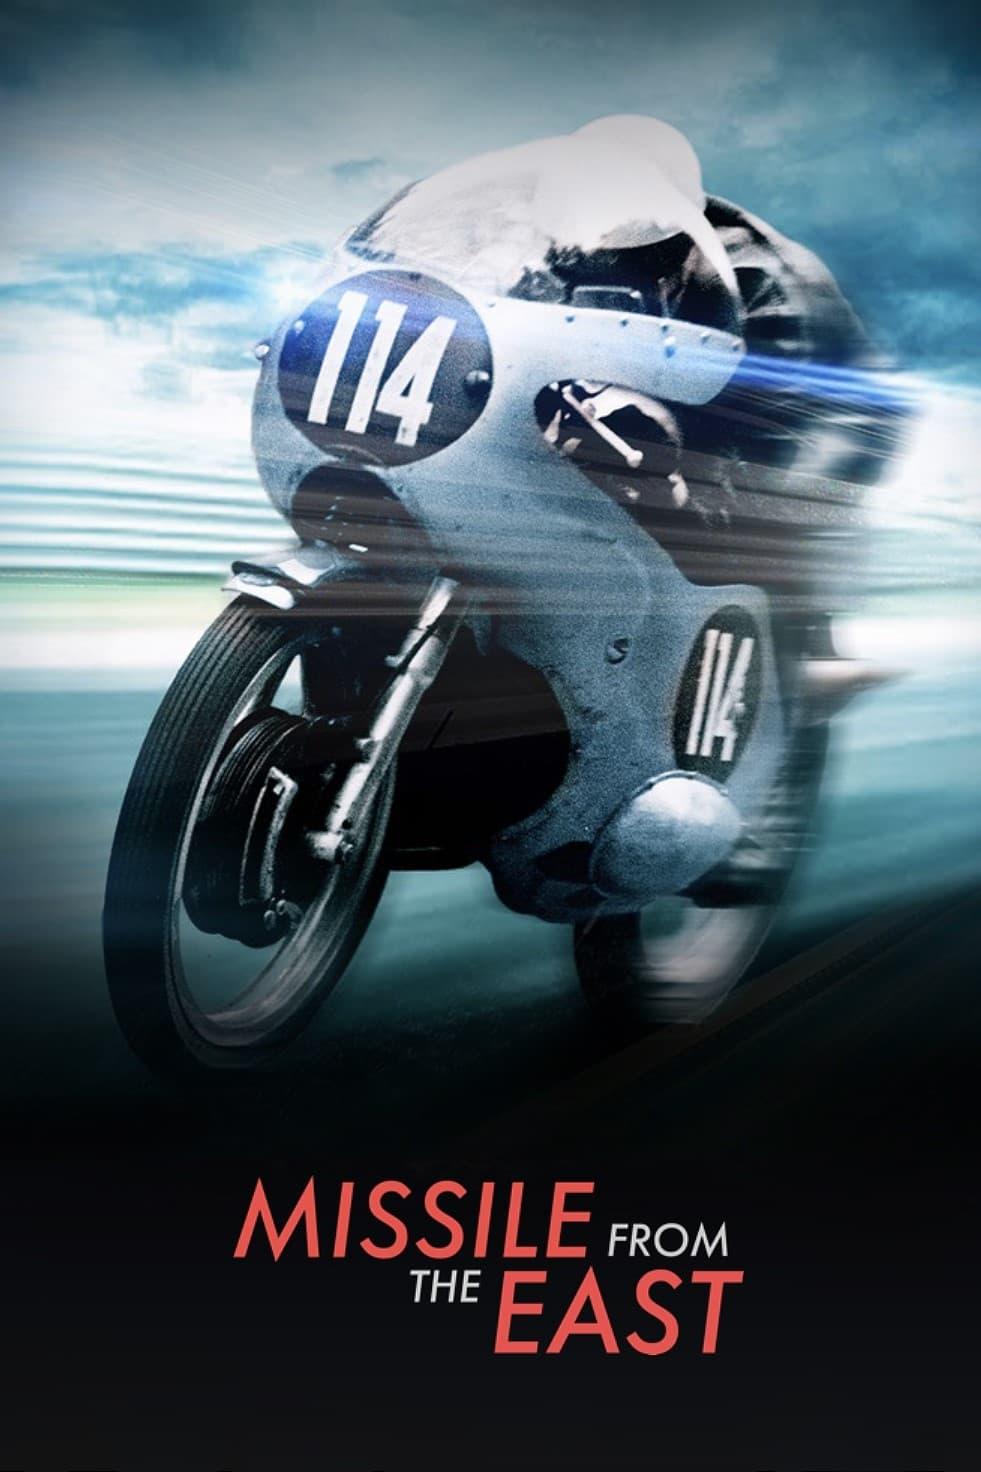 Missile from the East poster